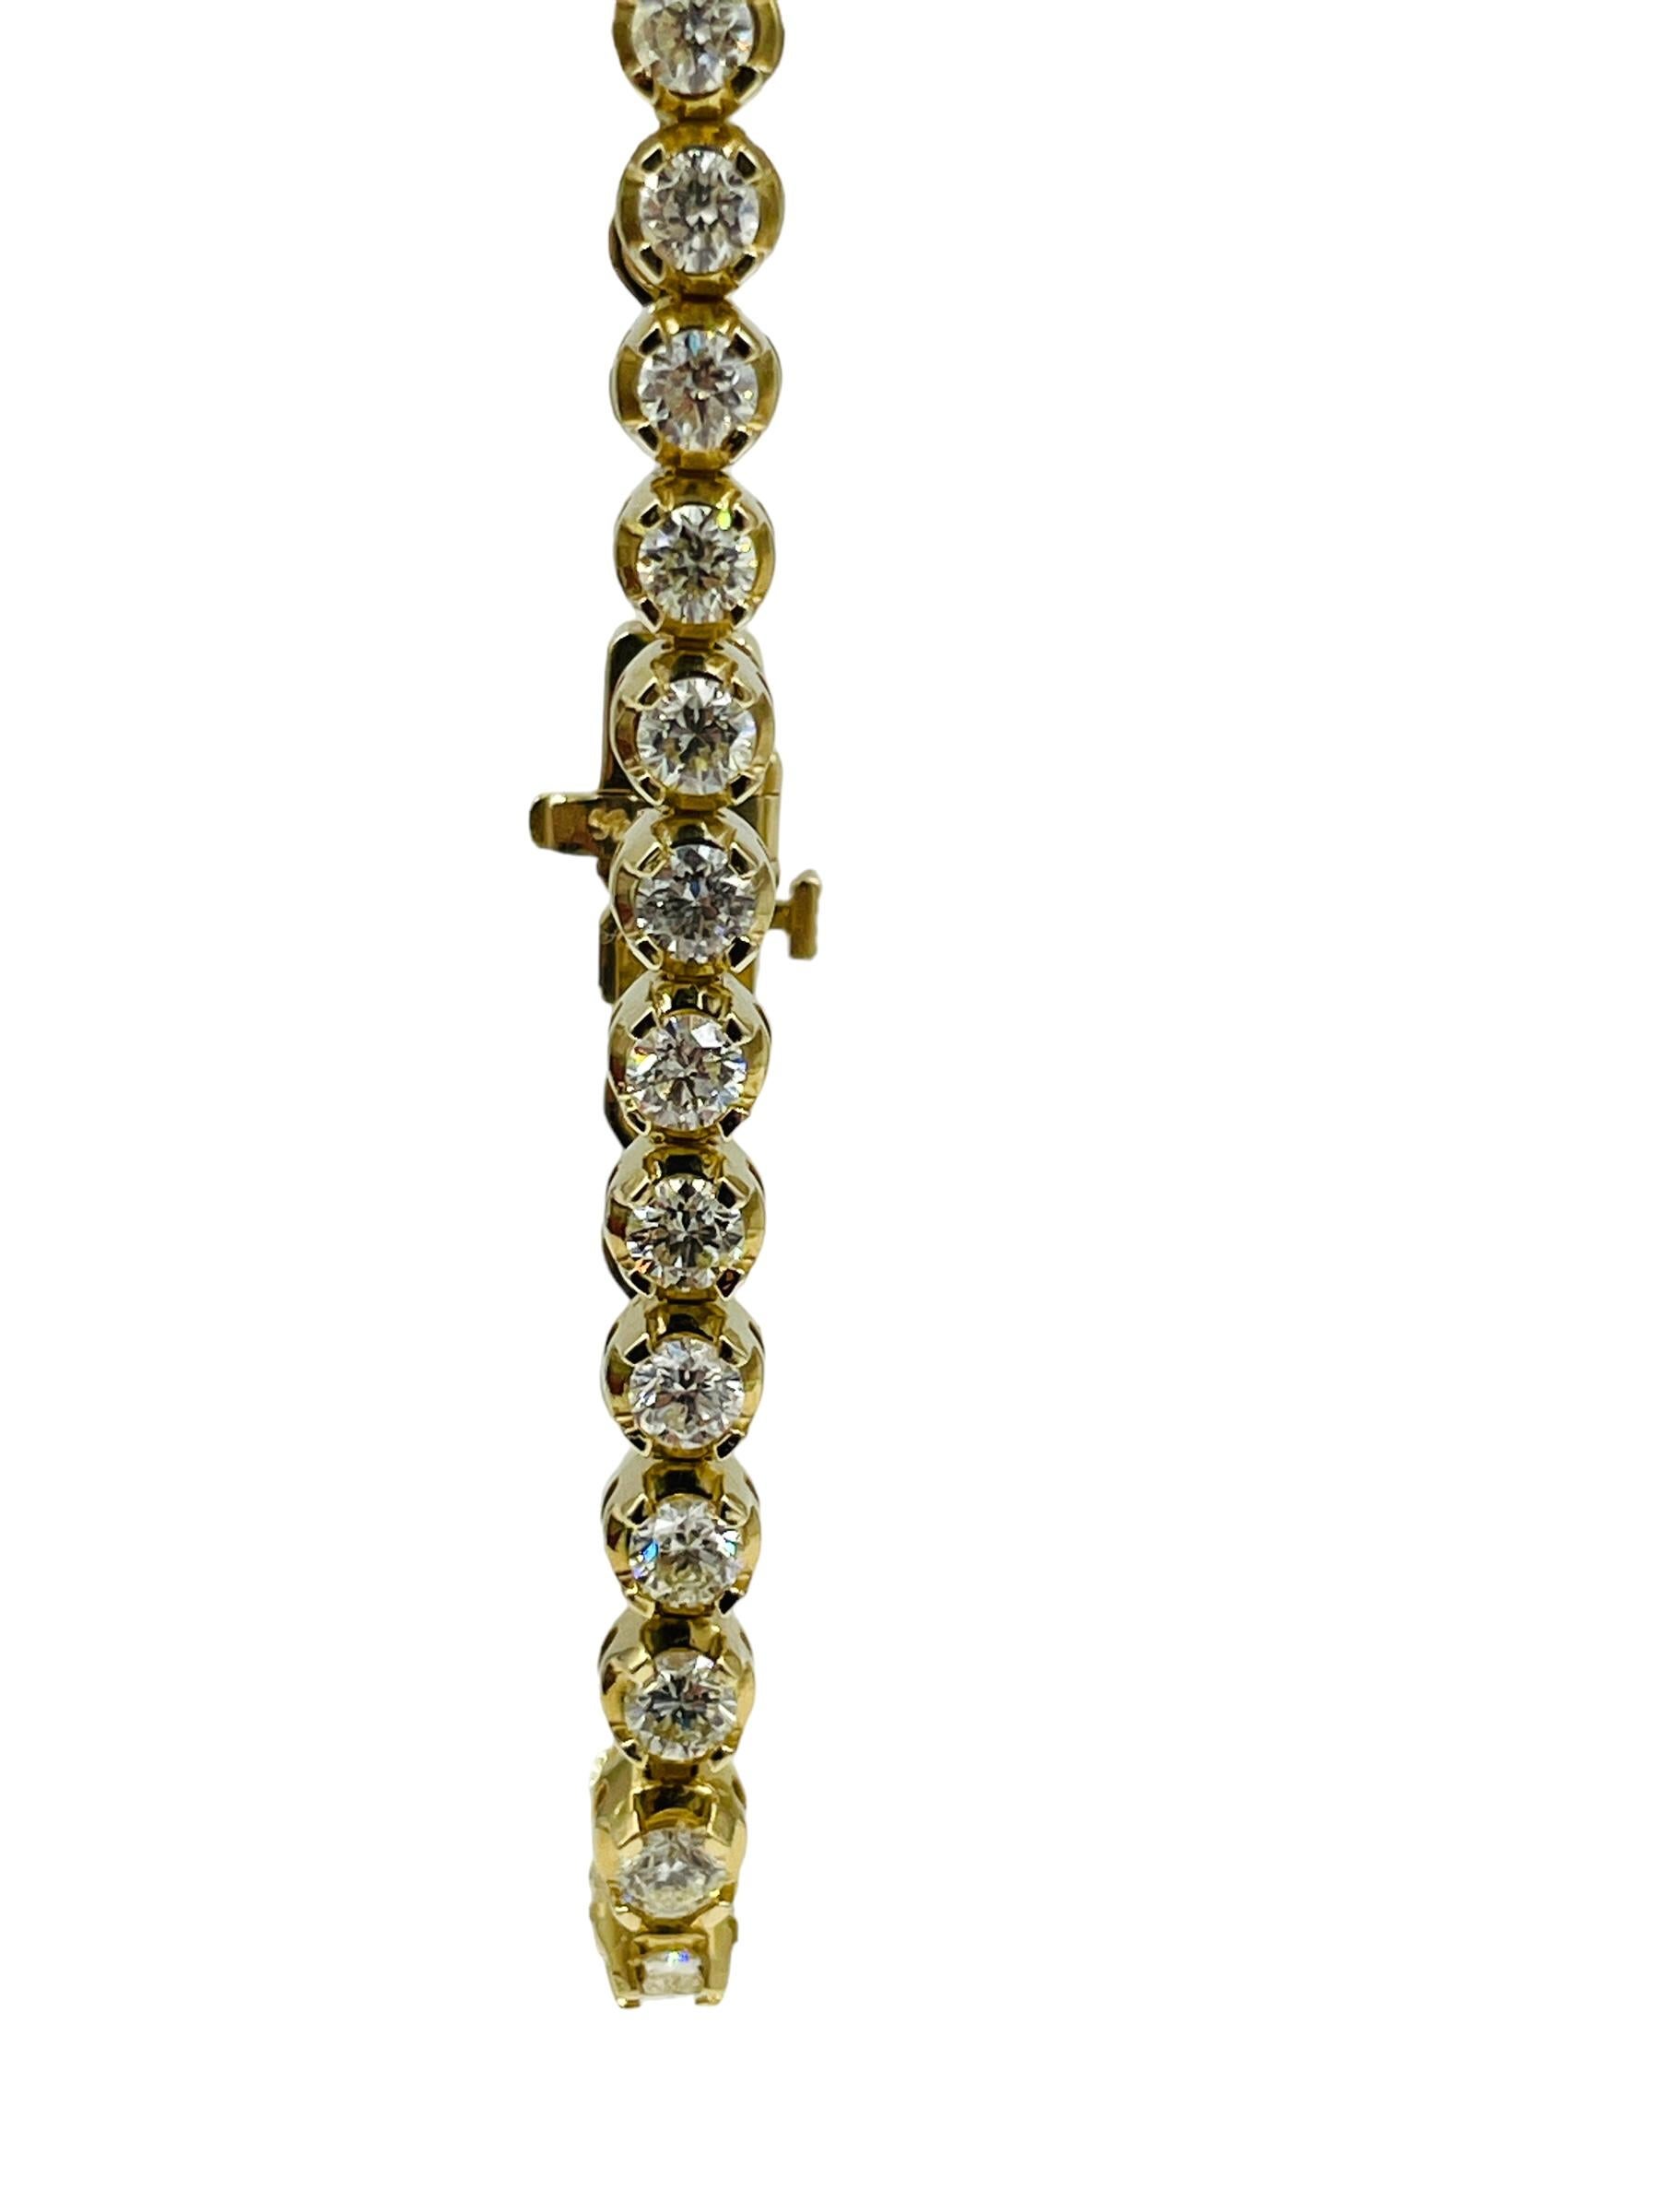 Round Cut Diamond Yellow Gold Tennis Bracelet 6 1/2 Inches Long For Sale